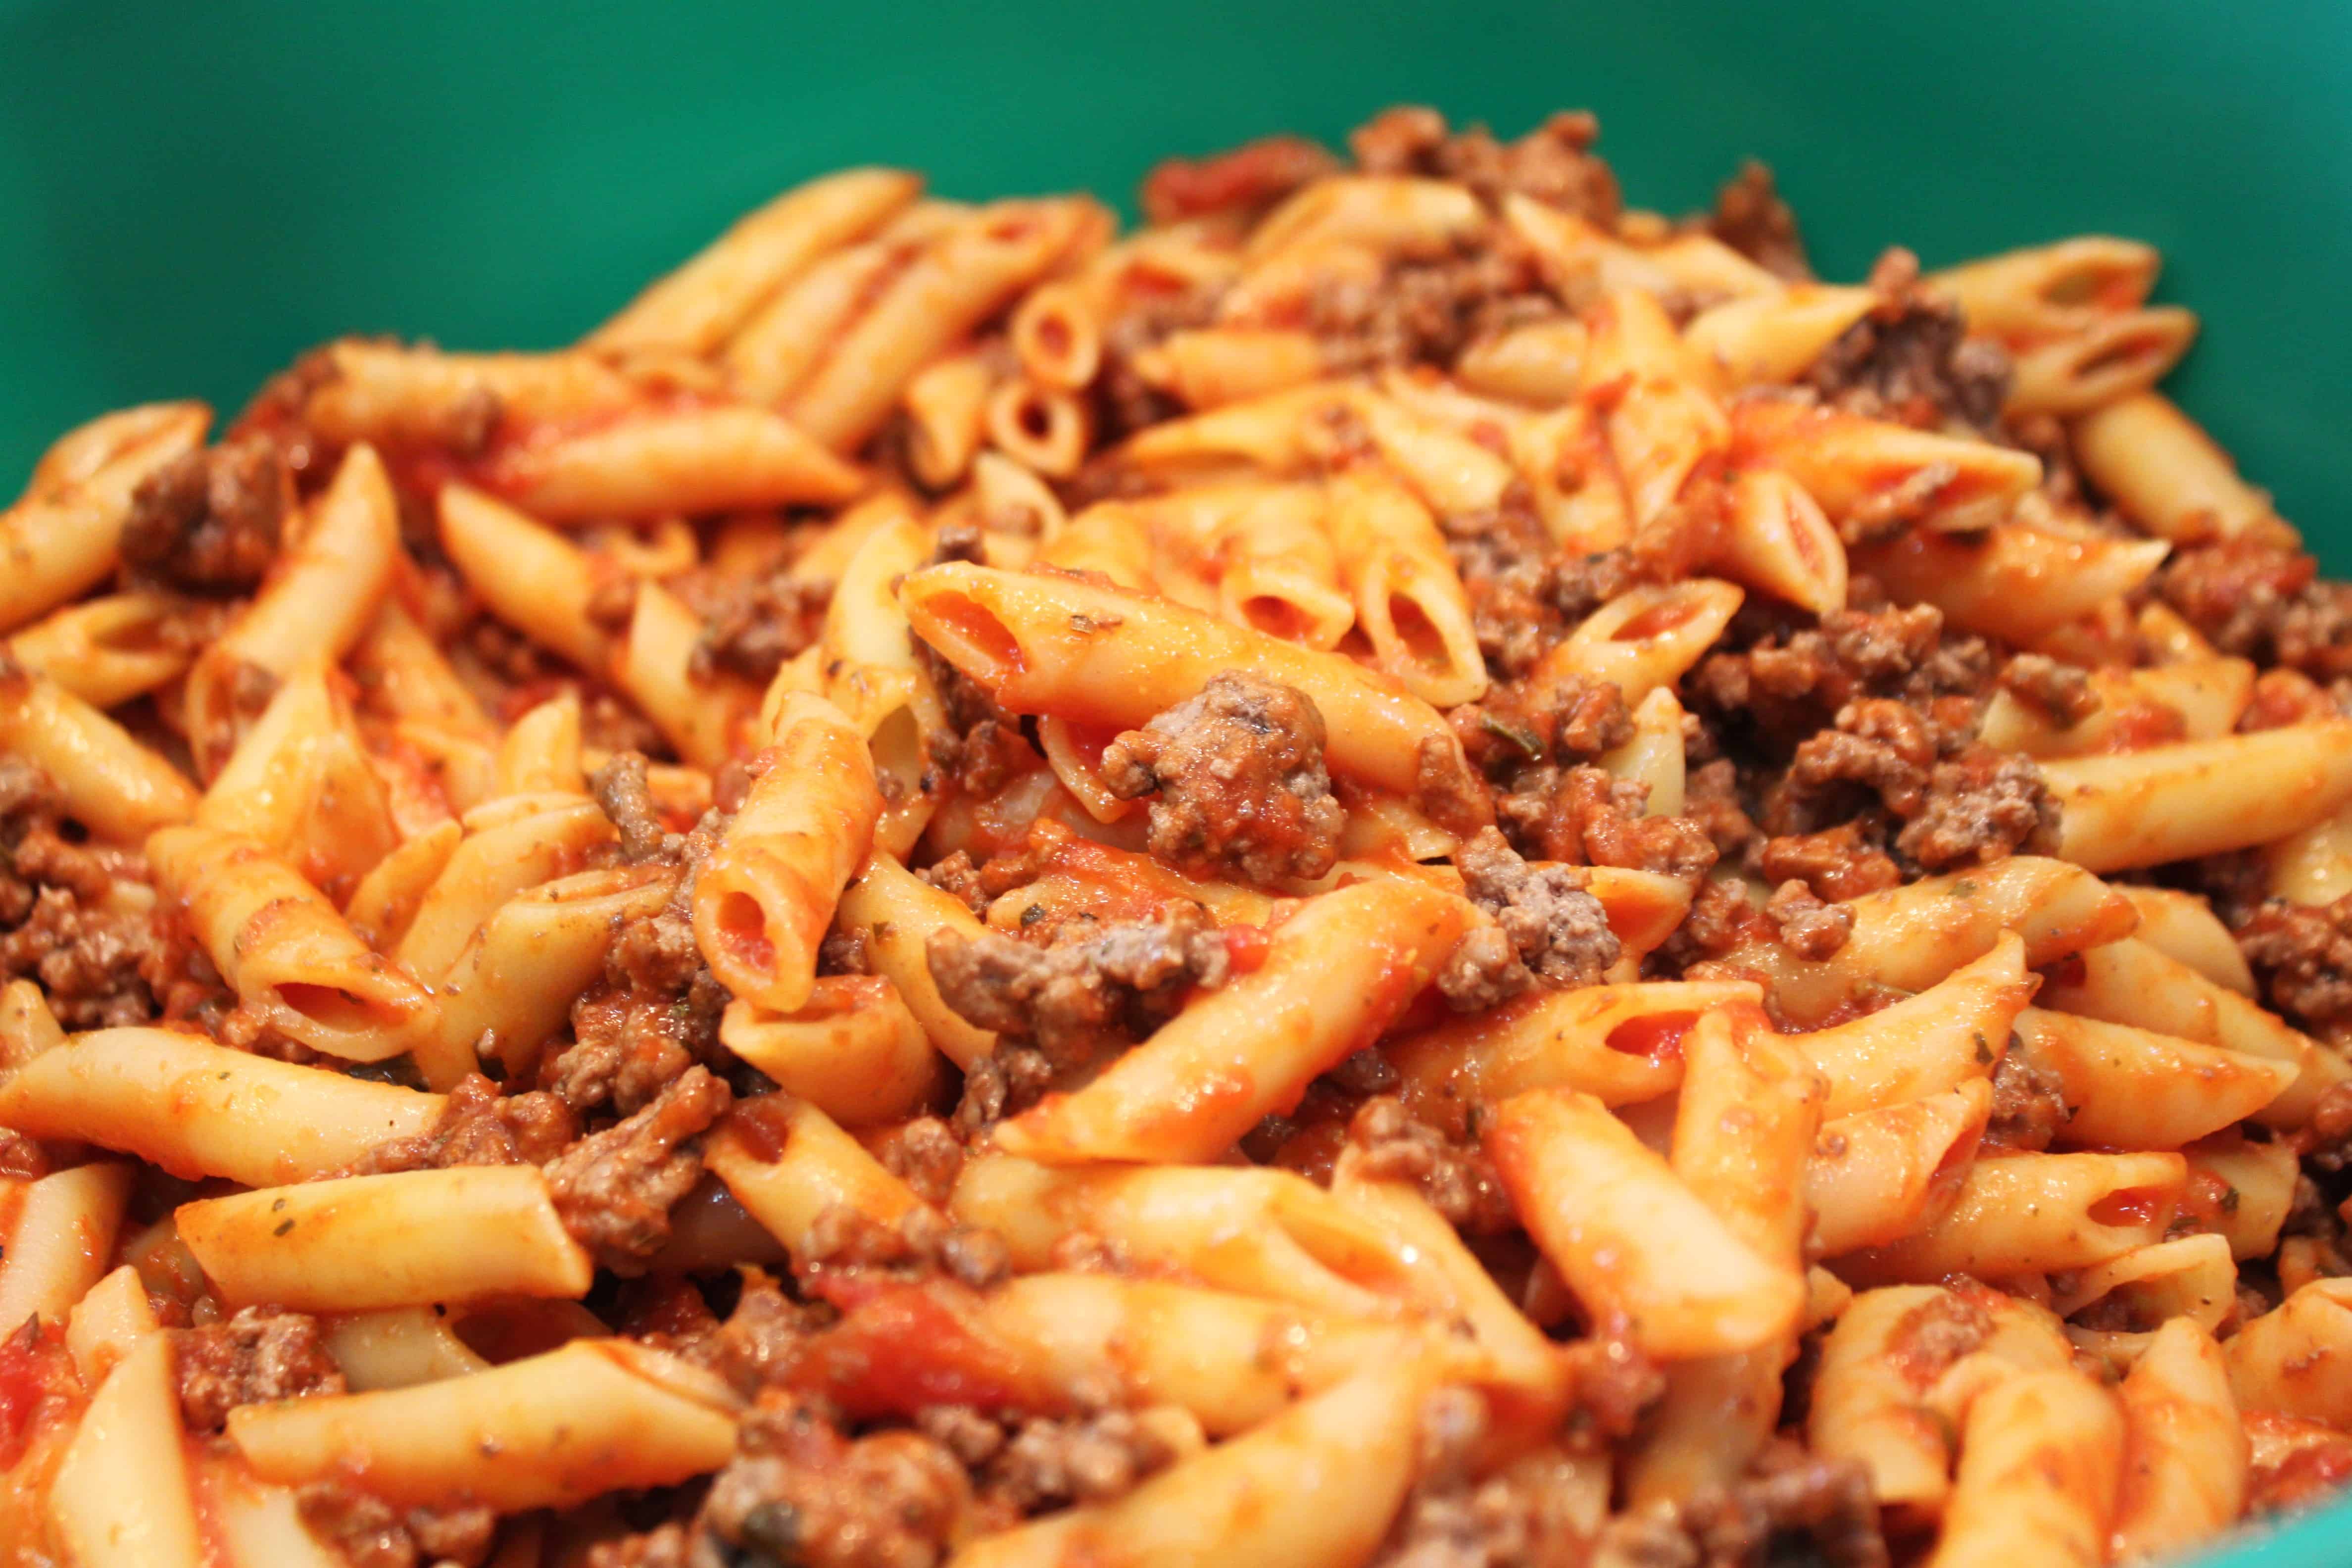 Penne Pasta with ground beef for Baked Ziti Recipe | Created by Diane